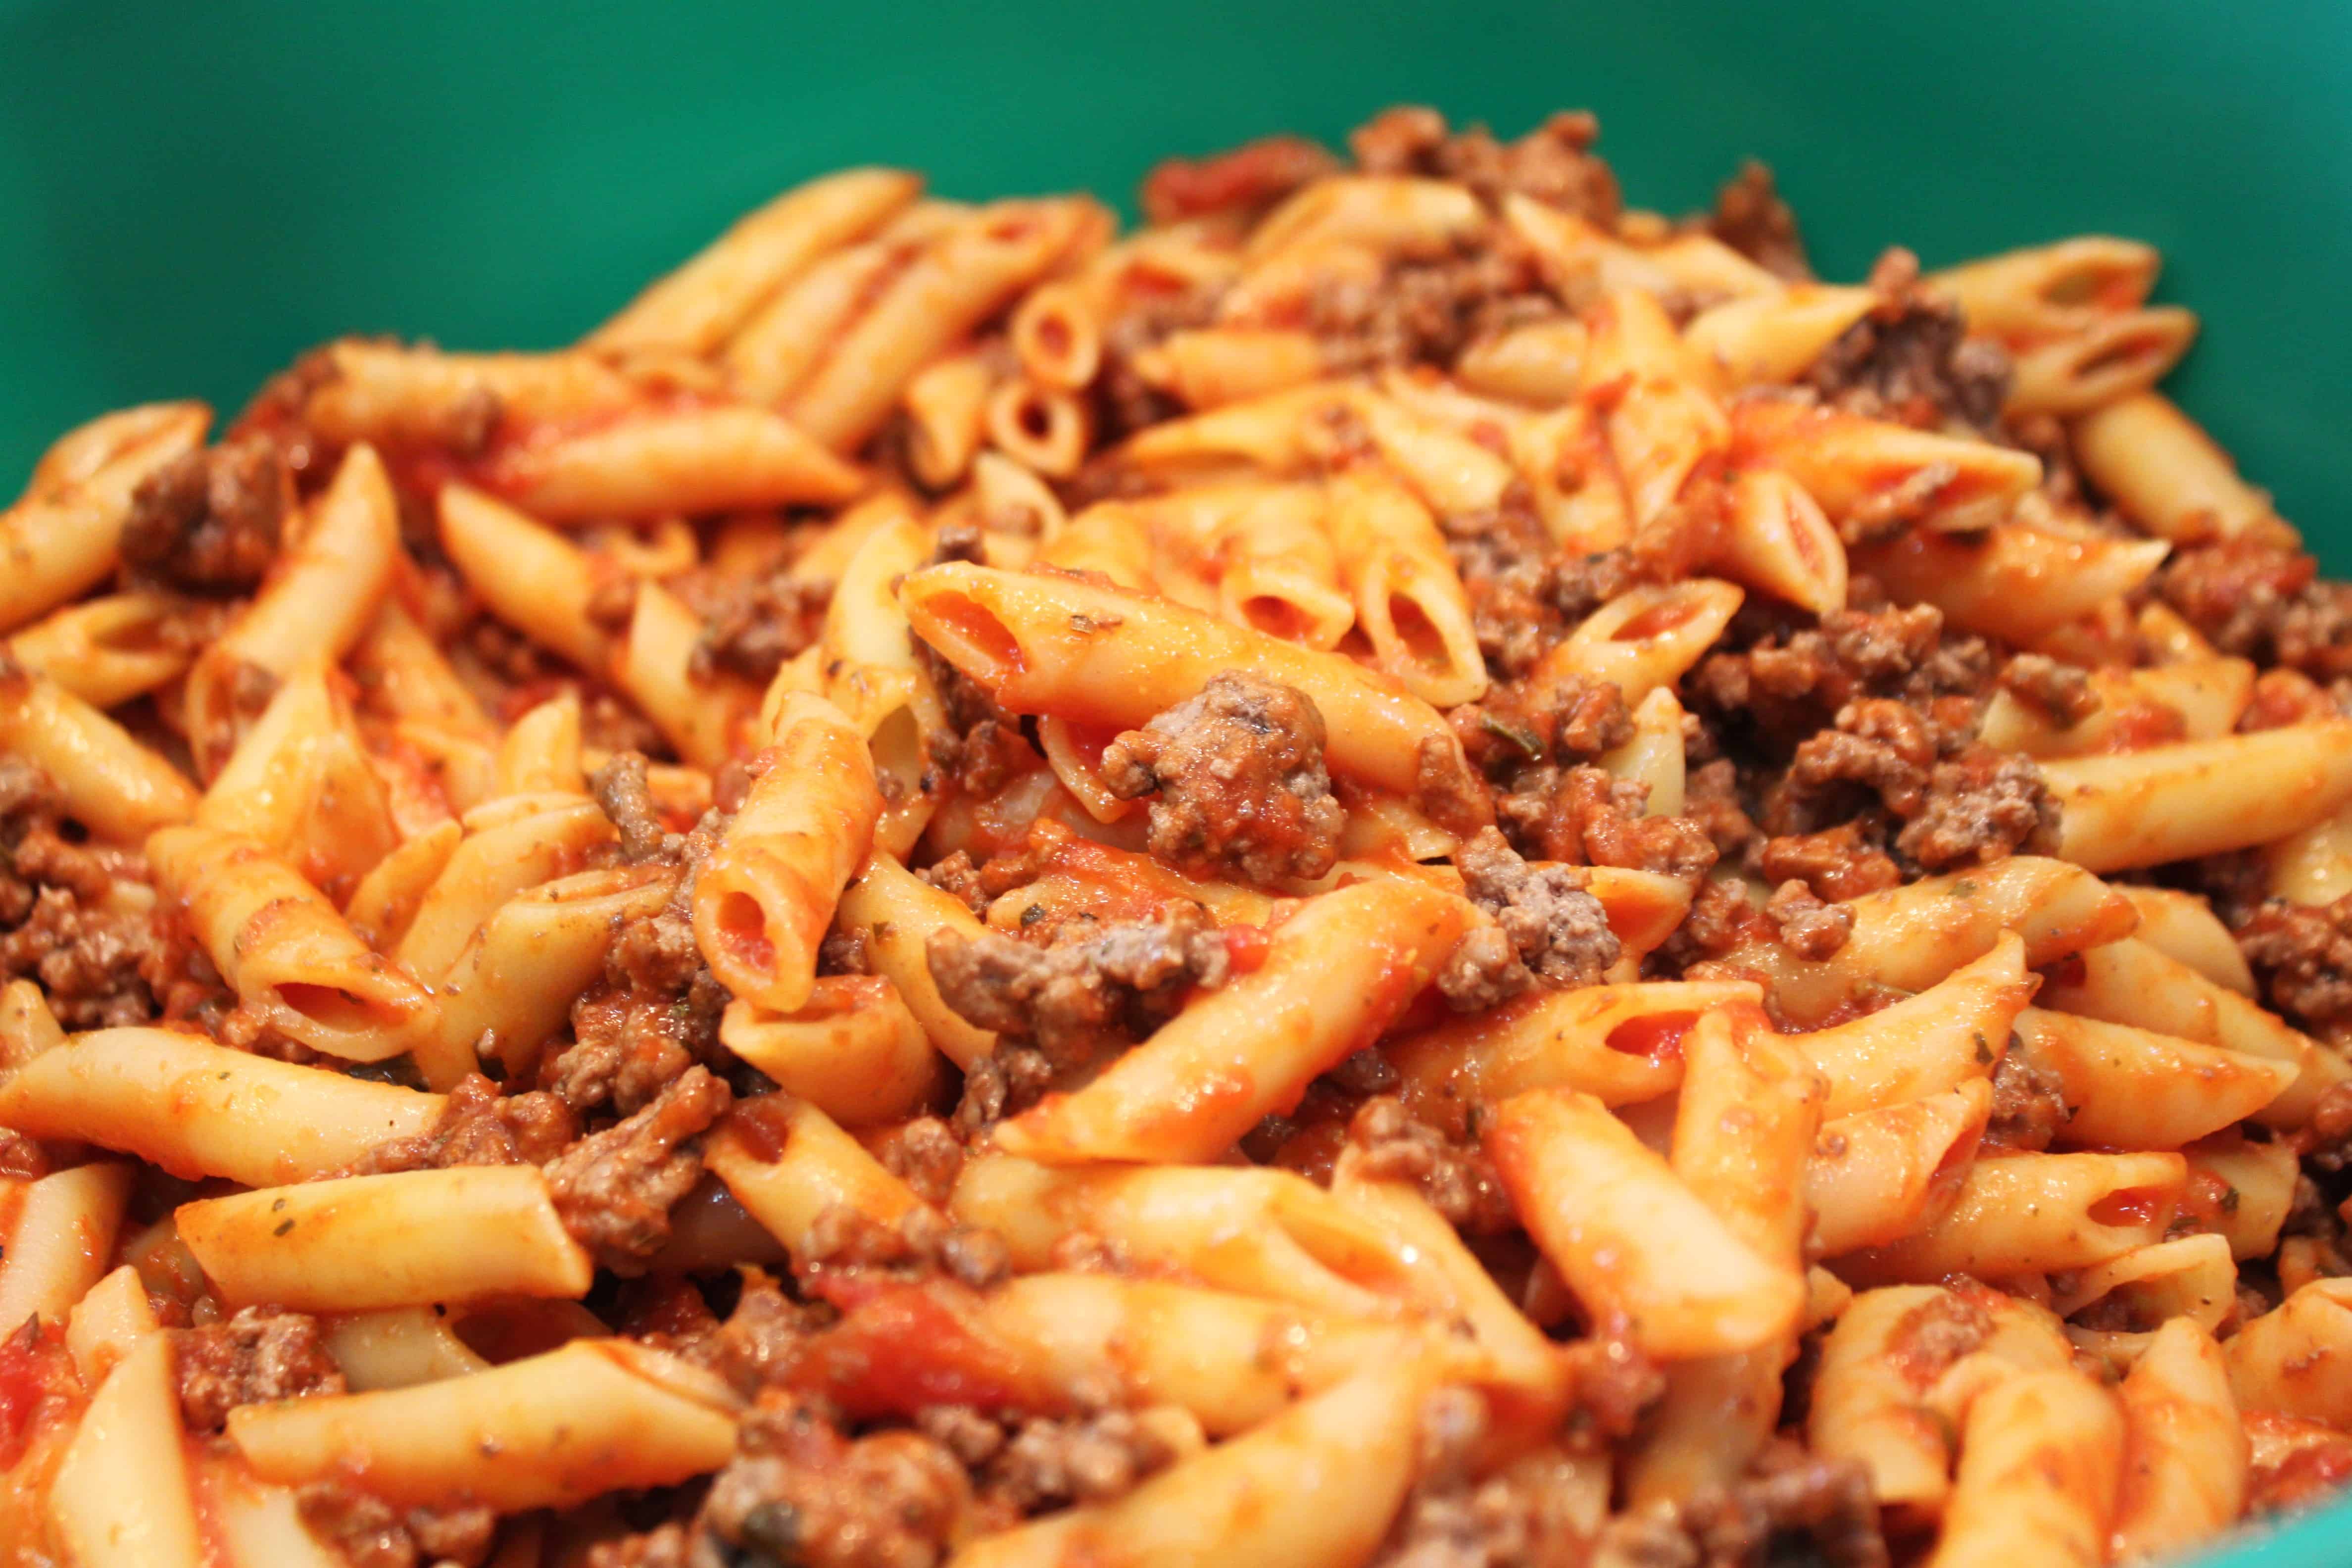 Penne Pasta with ground beef for Baked Ziti Recipe | Created by Diane